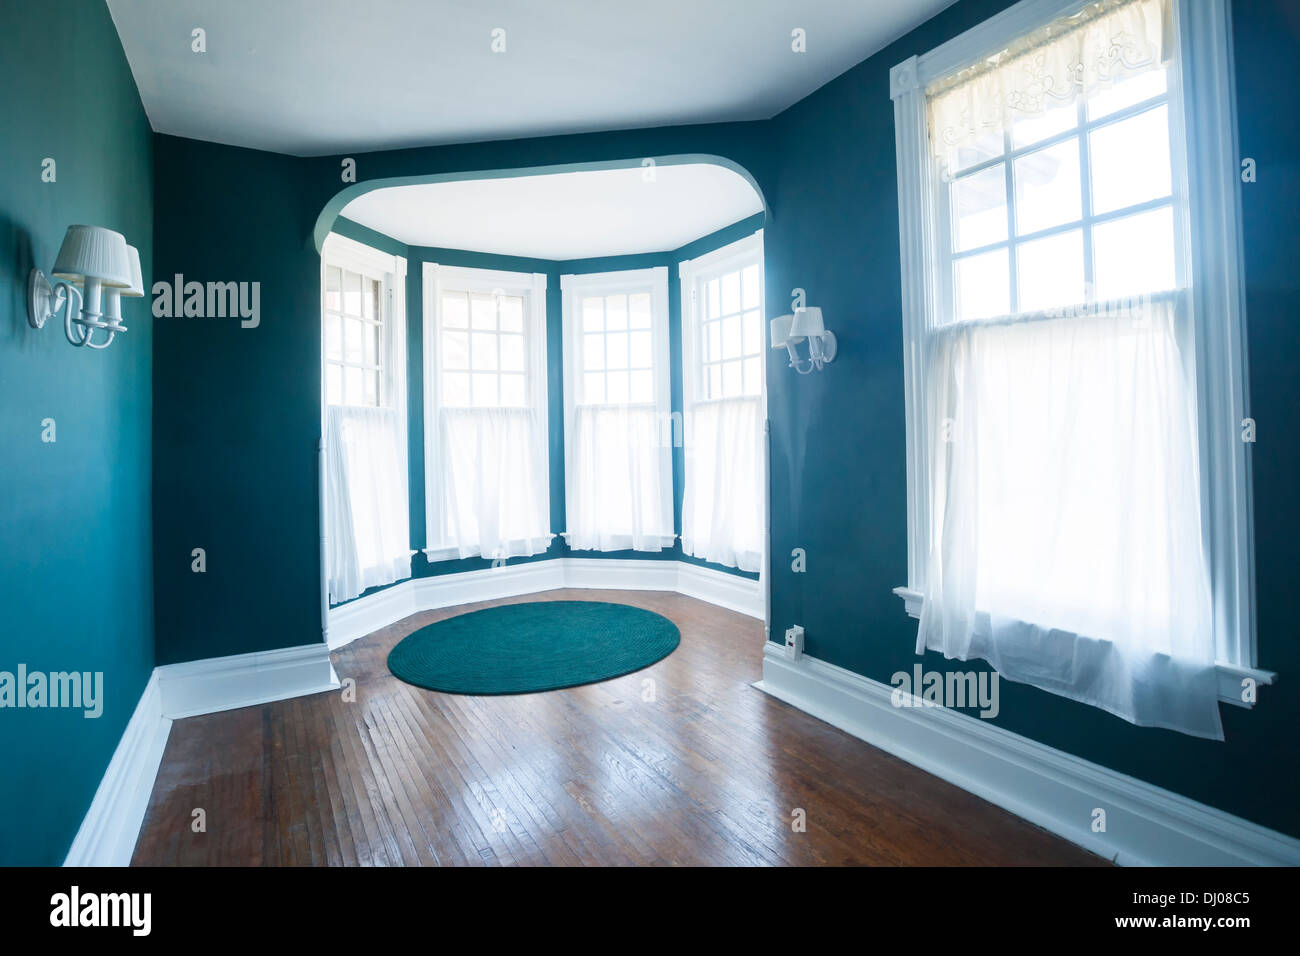 Empty room with 5 windows, sconces, and wood flooring inside a Tudor home, USA Stock Photo